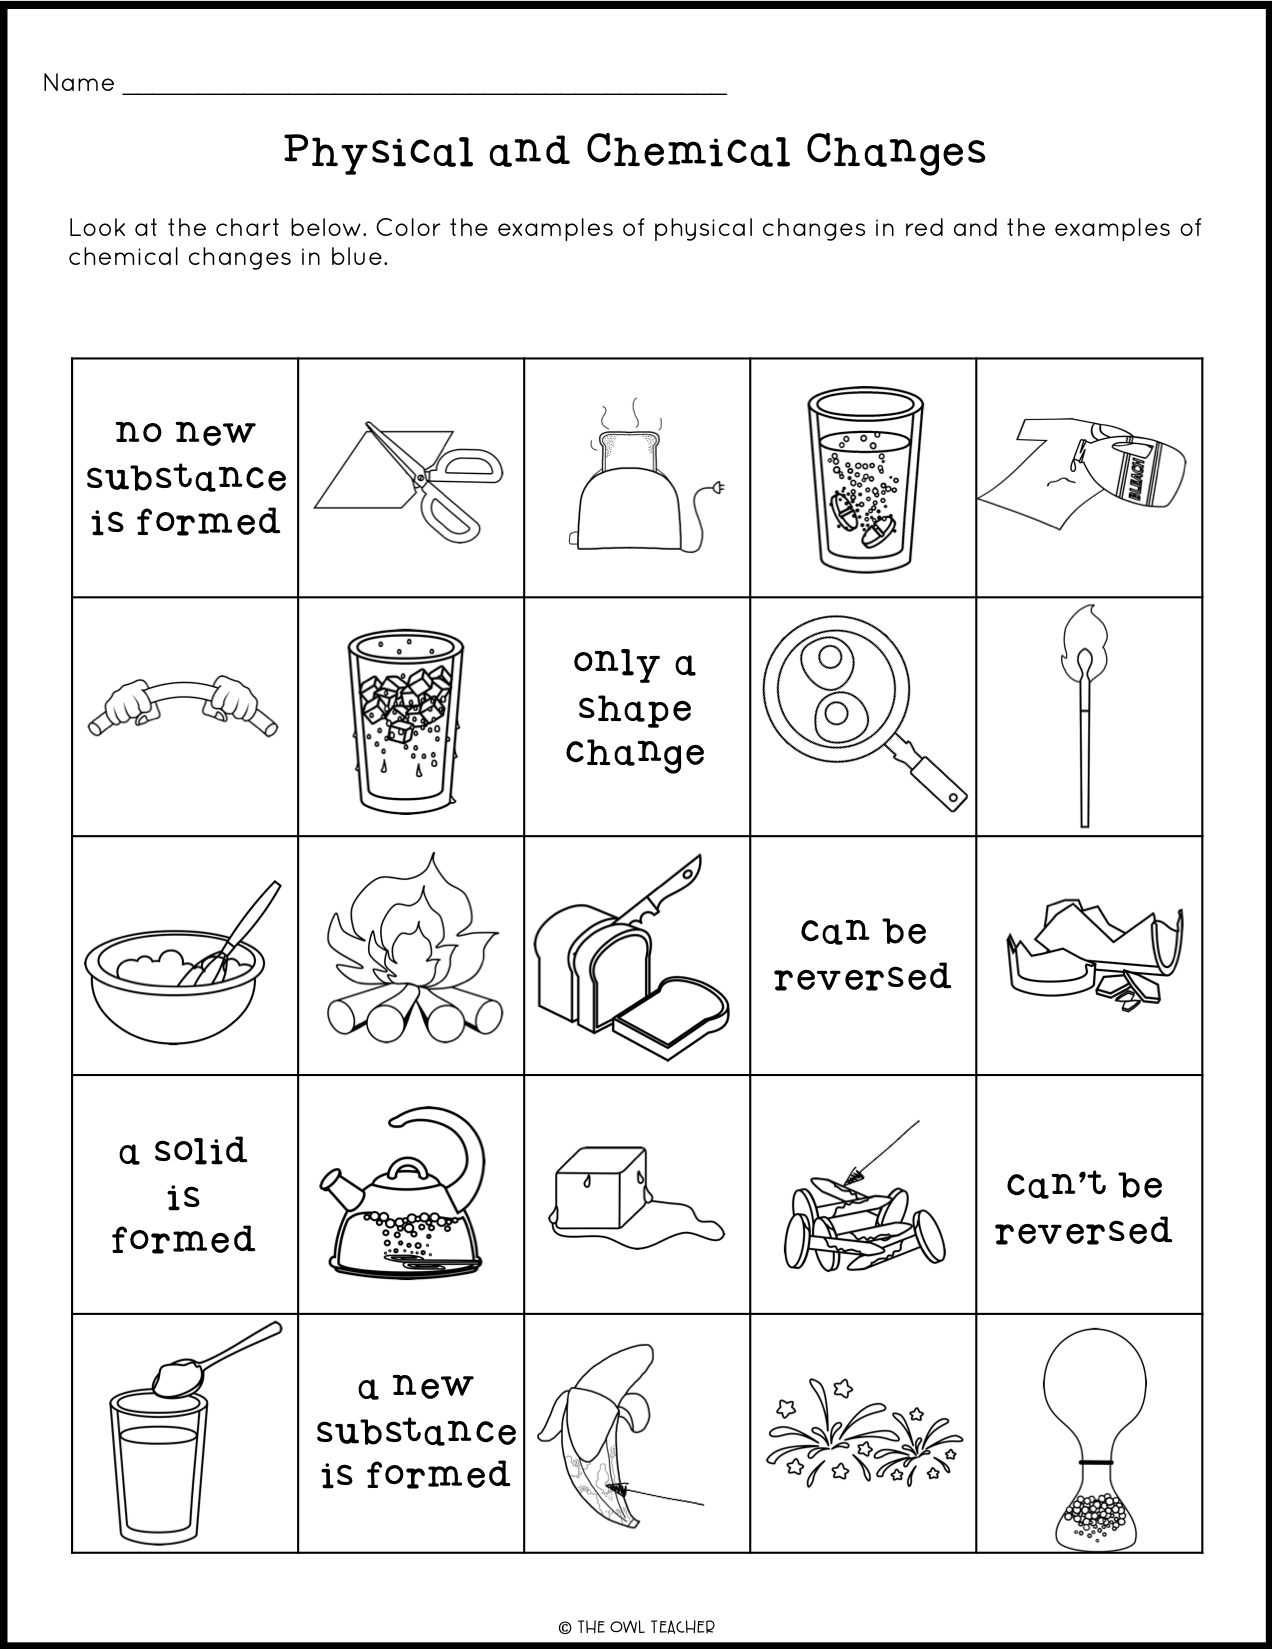 Physical and Chemical Changes Craftivity - The Owl Teacher With Chemical And Physical Changes Worksheet